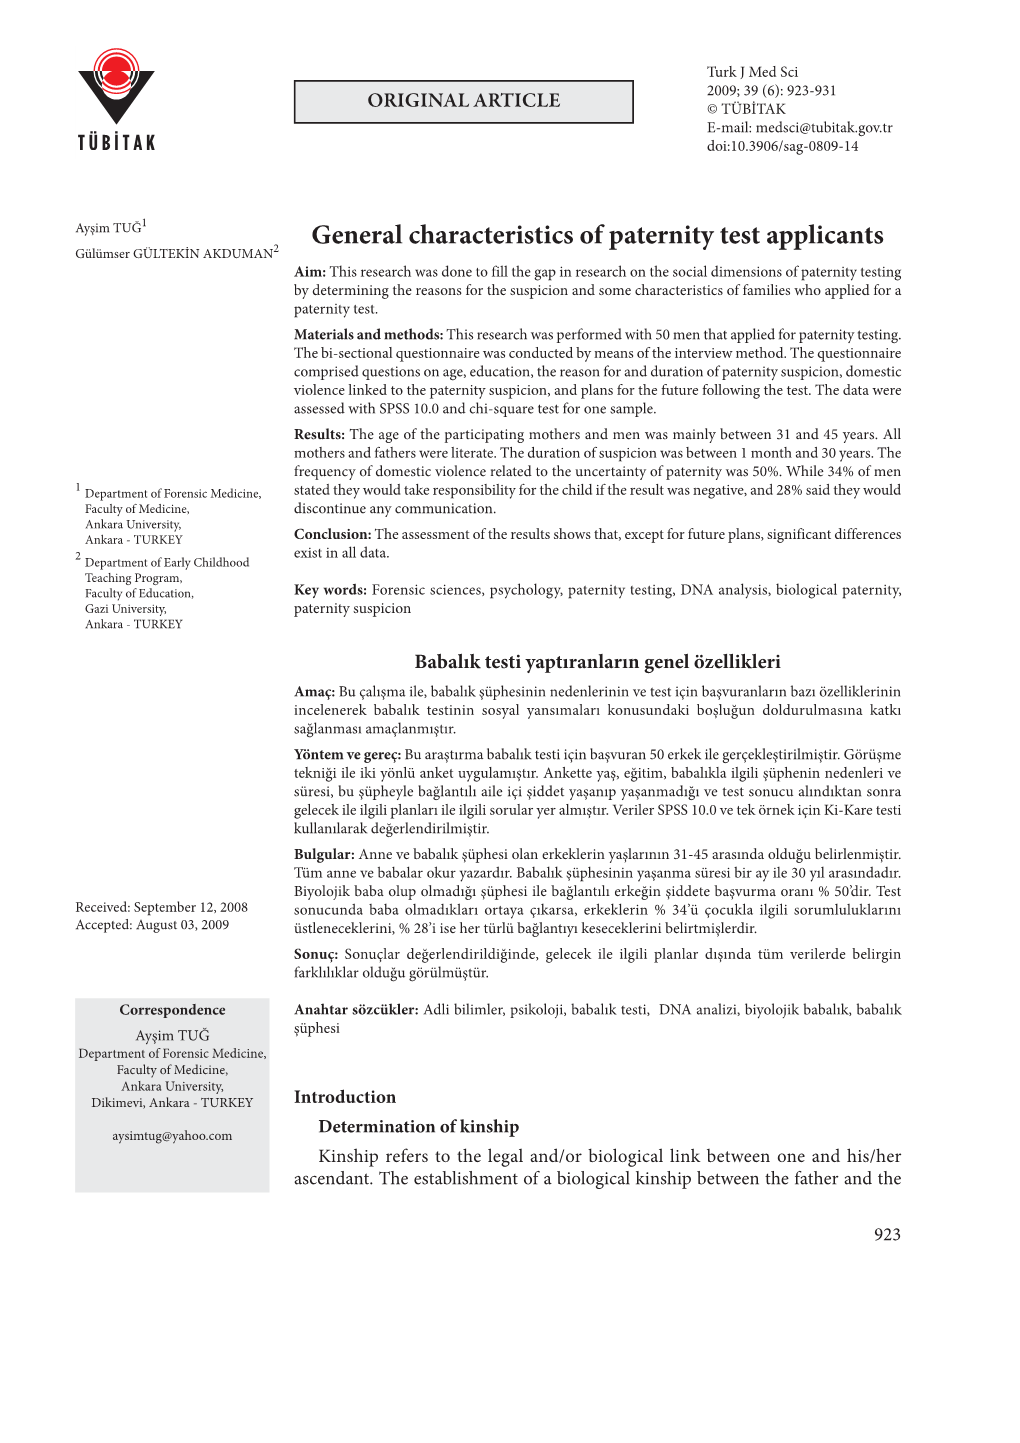 General Characteristics of Paternity Test Applicants